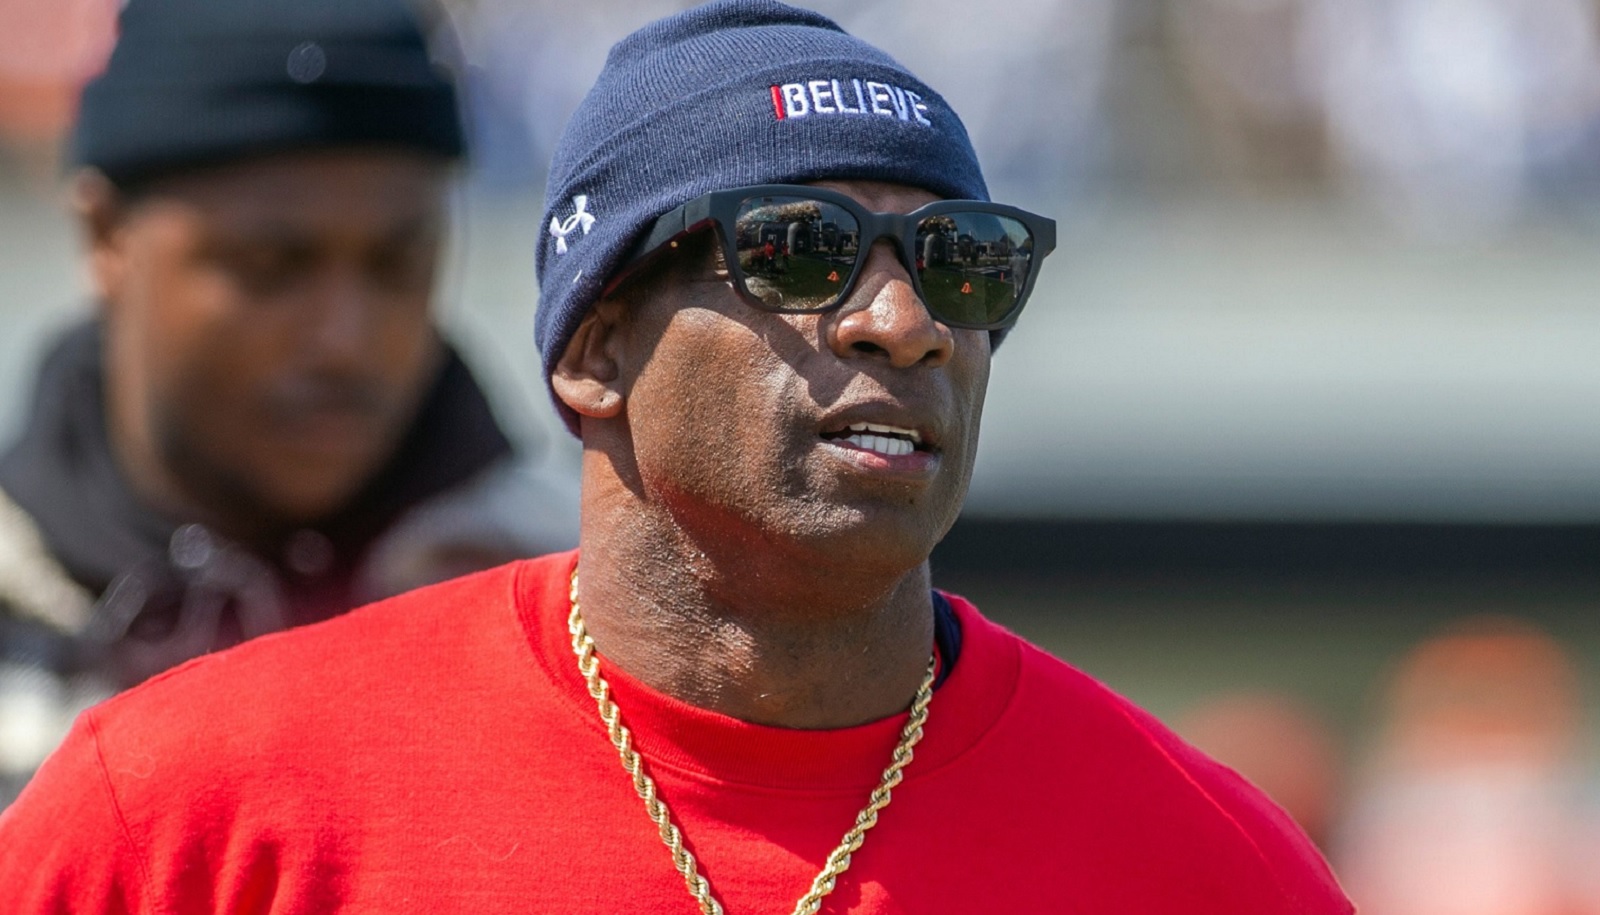 Deion Sanders' 'Prime' sunglasses bring in almost $5 million in first three  days of presale orders: report